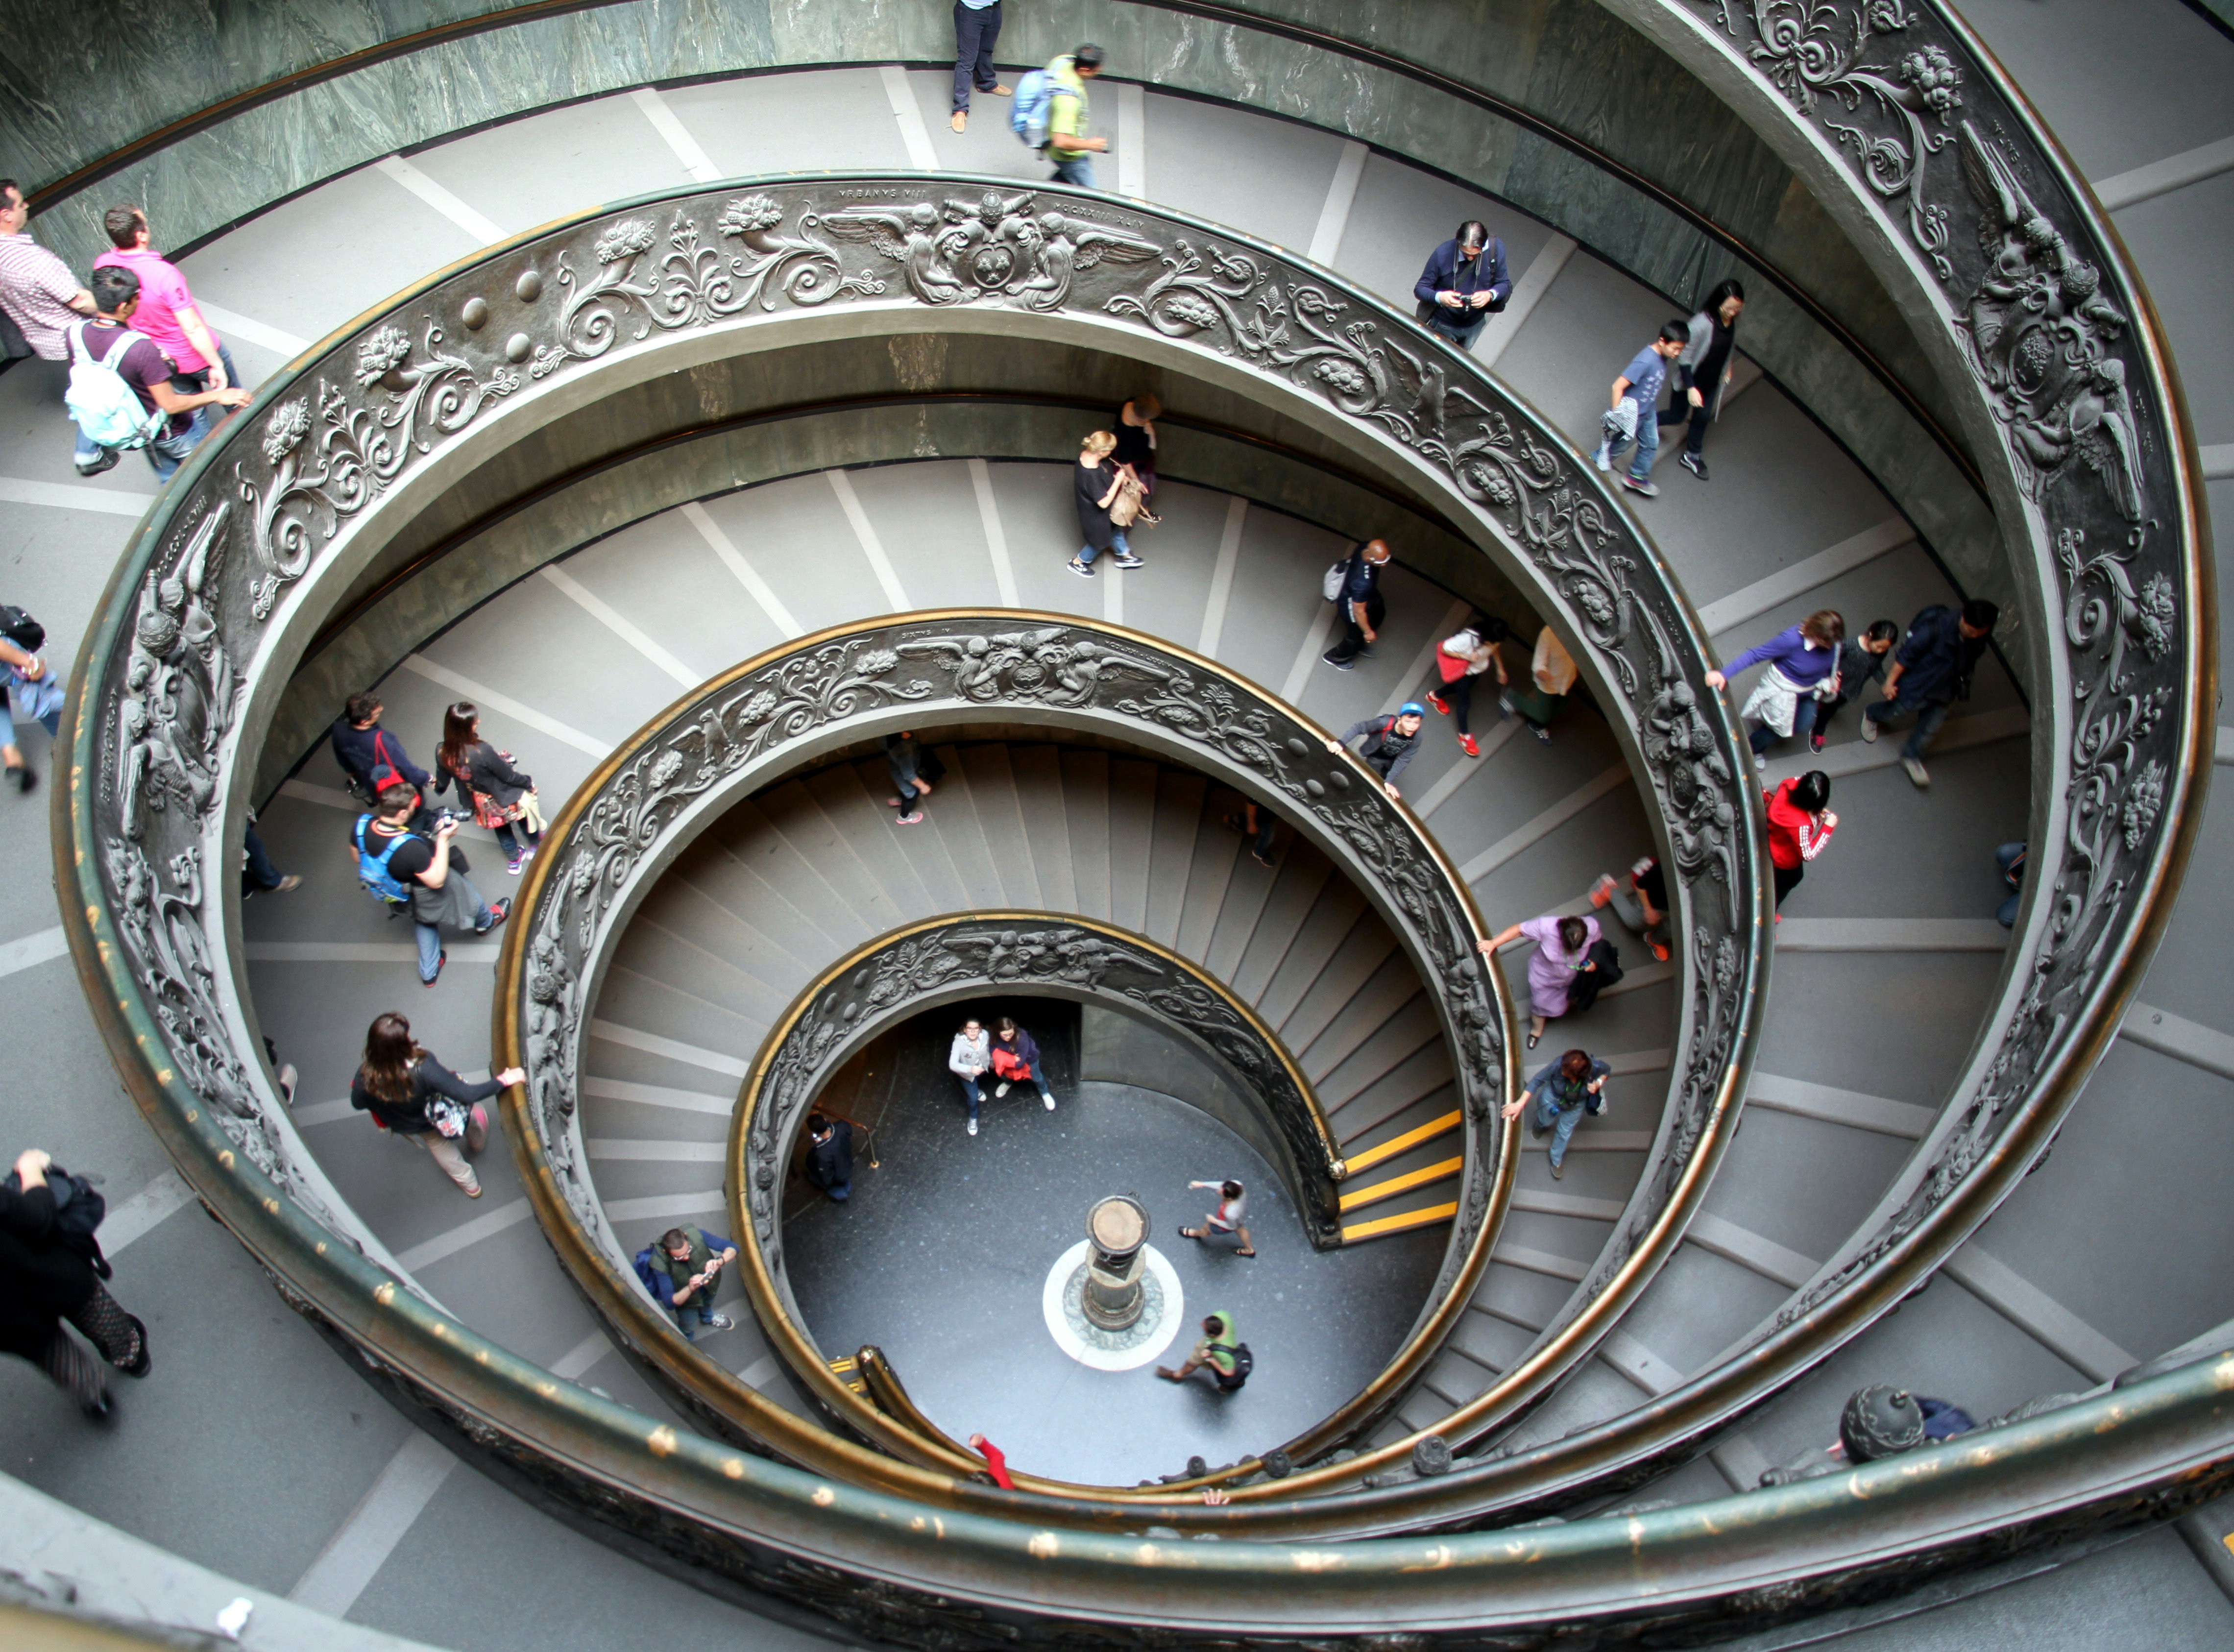 great photo recipe,how to photograph spiral stairs in museum of vaticano, italy, april 2015; people walking in spiral staircase